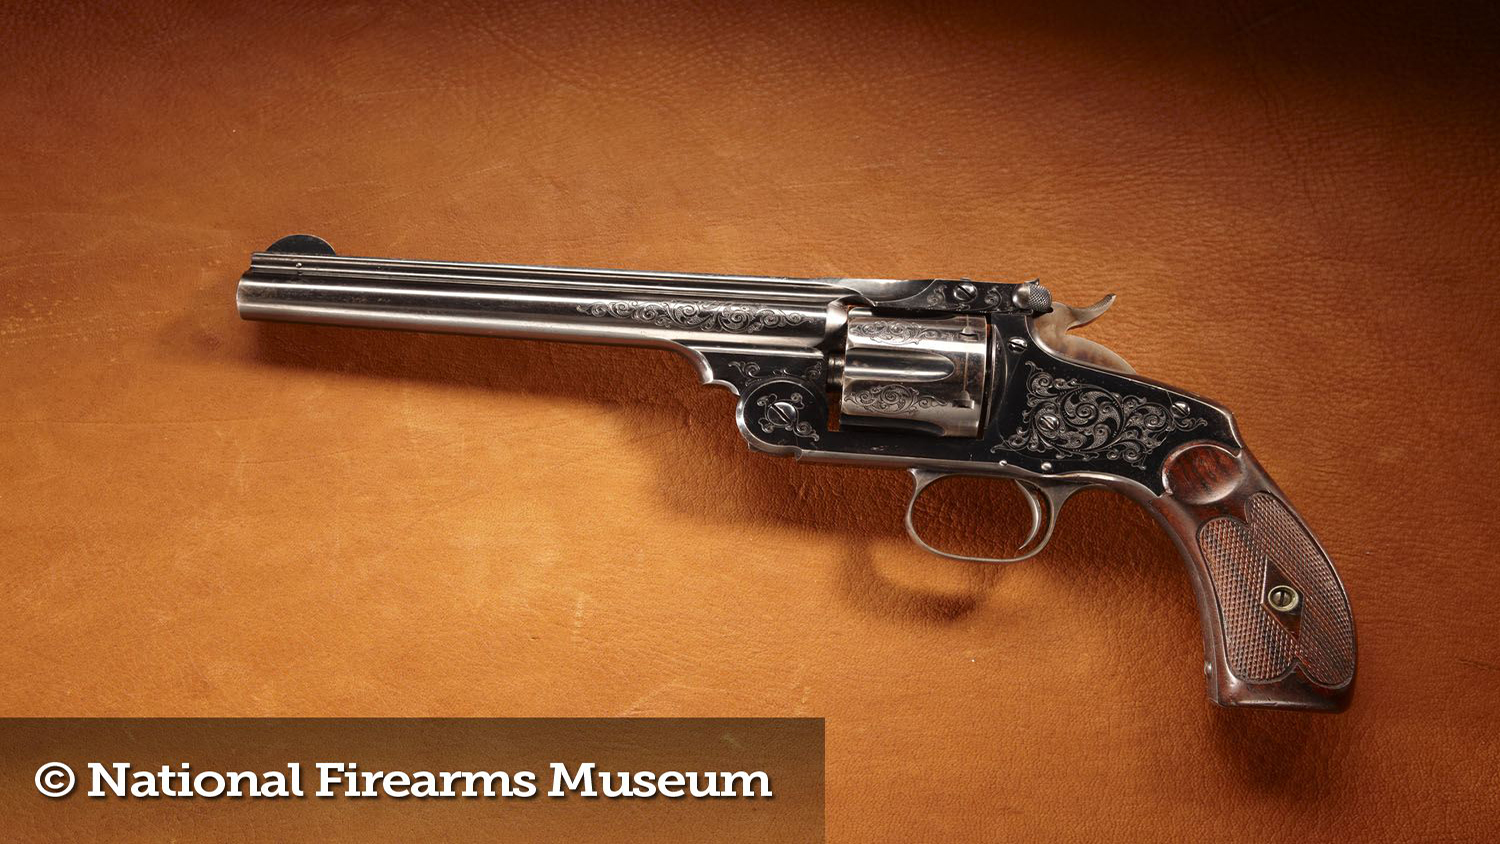 Gun of the Month: Theodore Roosevelt's Smith & Wesson New Model No. 3 Revolver